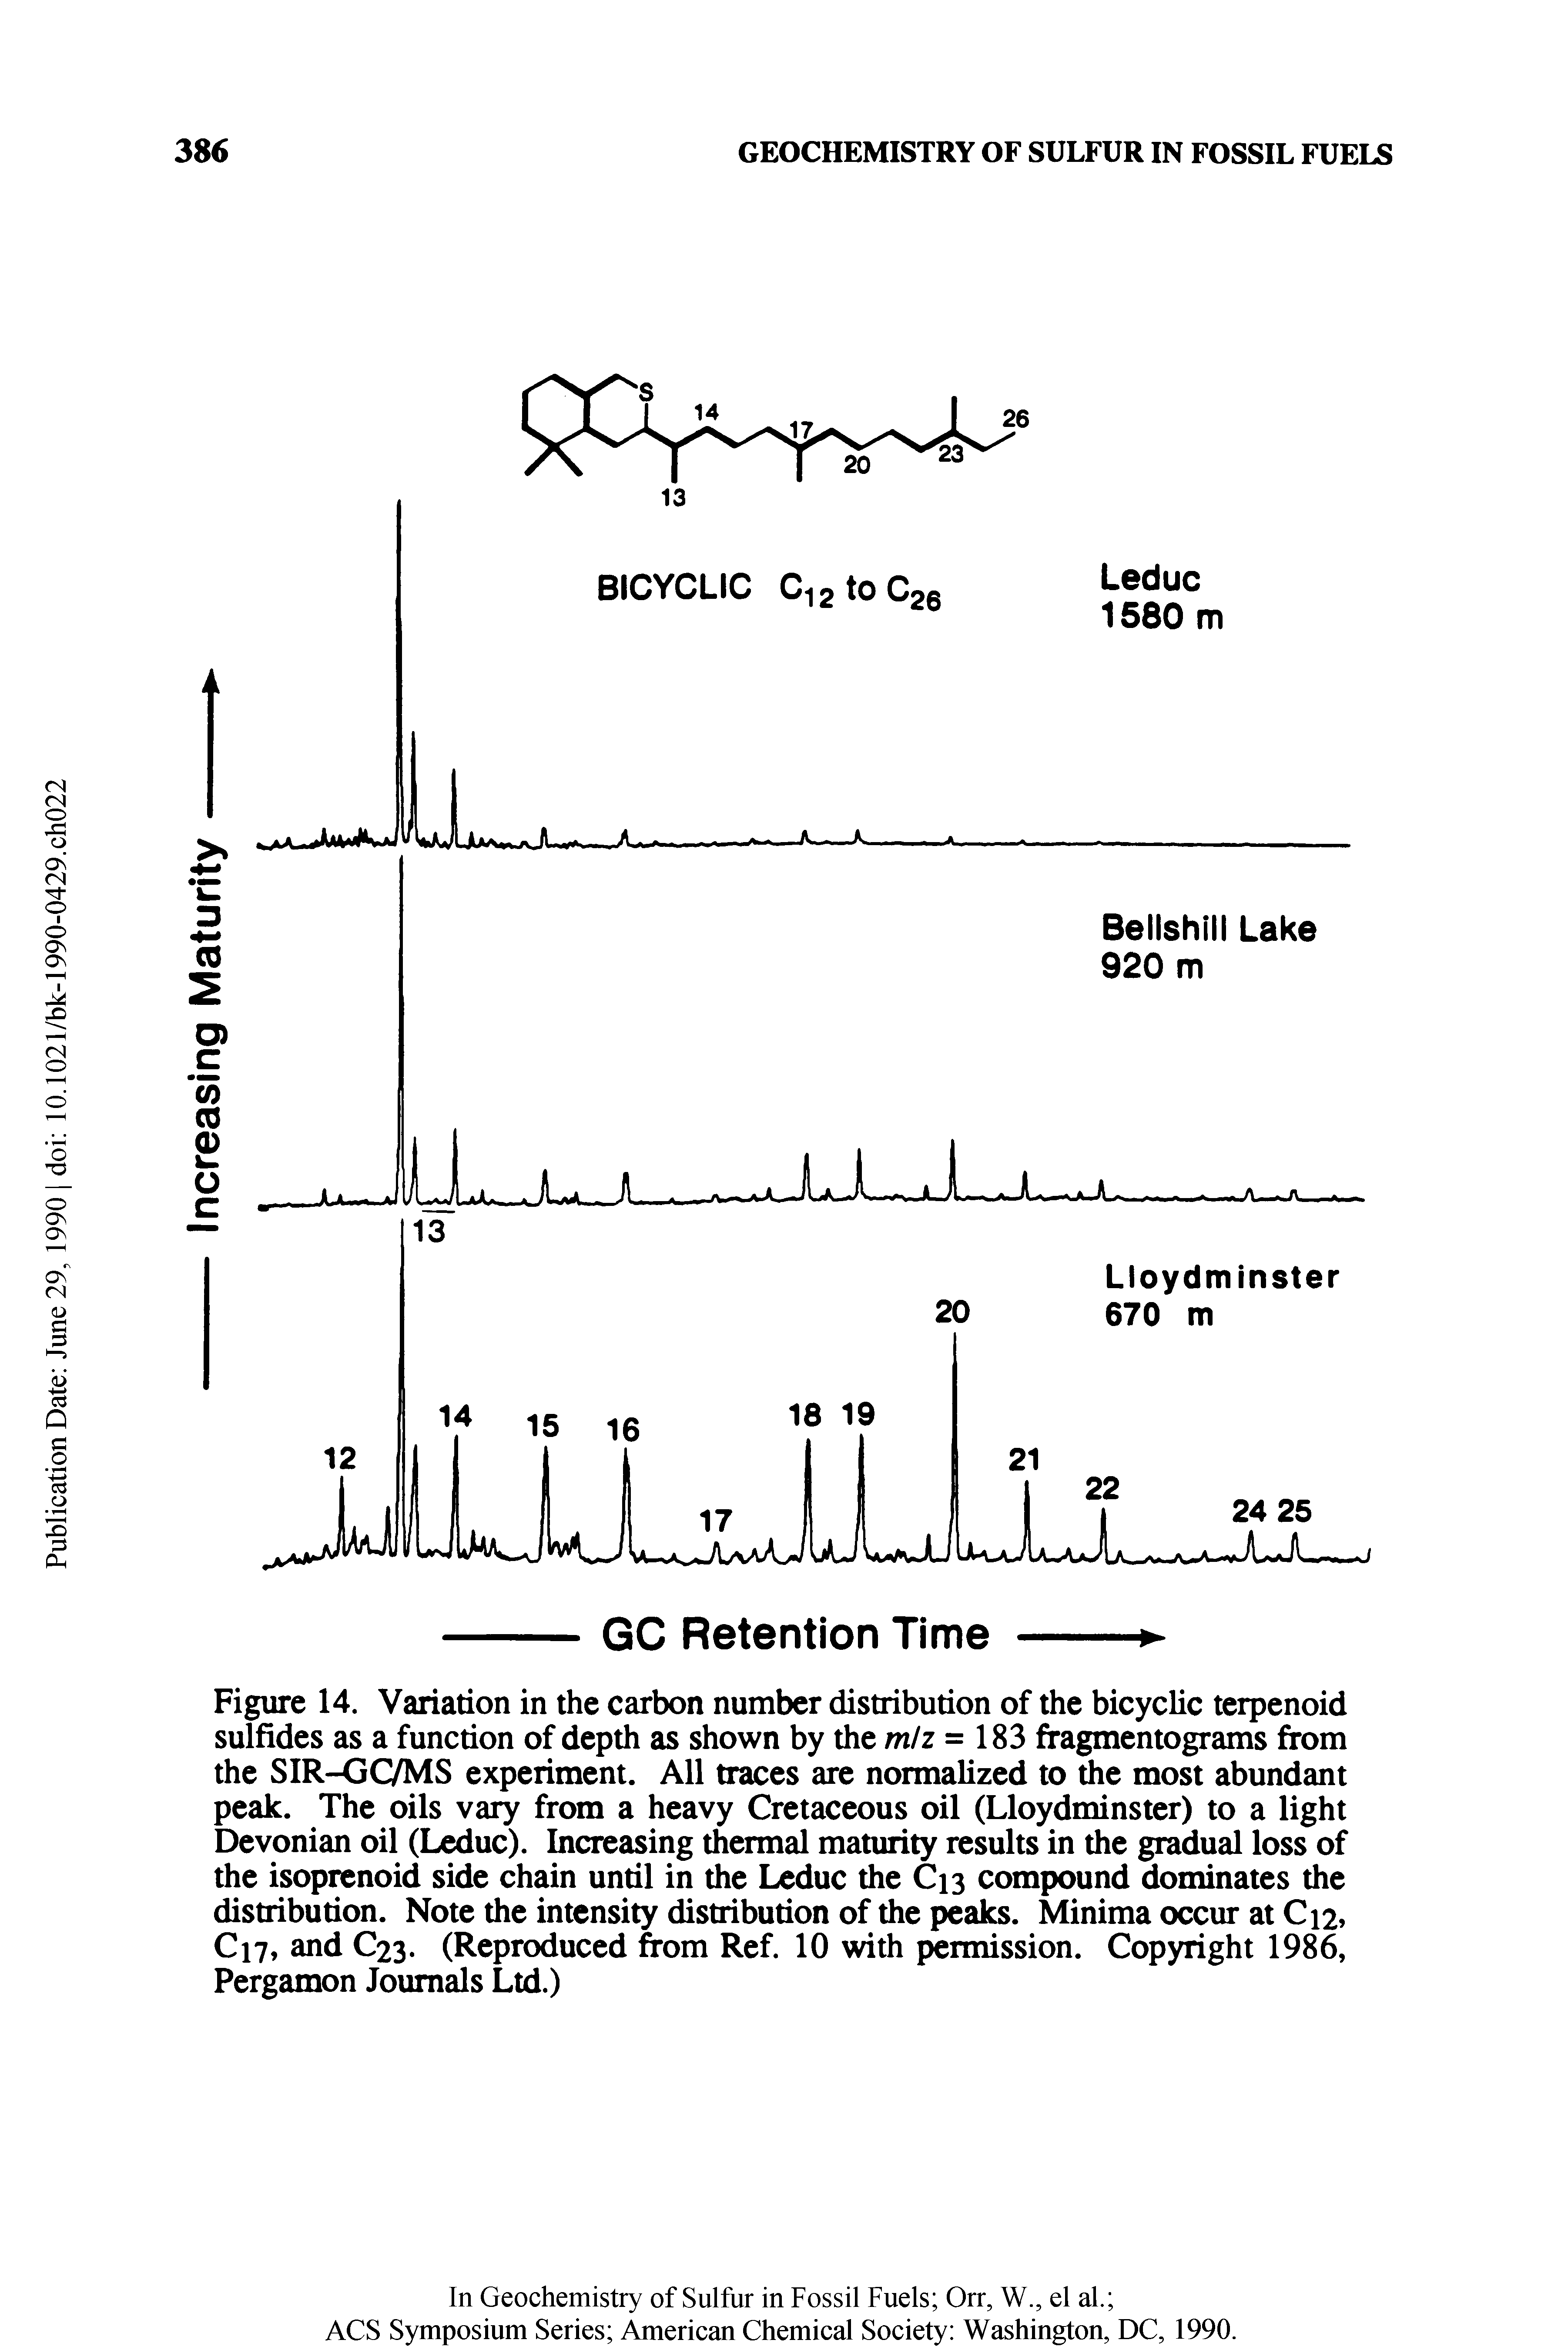 Figure 14. Variation in the carbon number distribution of the bicyclic terpenoid sulfides as a function of depth as shown by the m/z =183 fragmentograms from the SIR-GC/MS experiment. All traces are normalized to the most abundant peak. The oils vary from a heavy Cretaceous oil (Lloydminster) to a light Devonian oil (Leduc). Increasing thermal maturity results in the gradual loss of the isoprenoid side chain until in the Leduc the C13 compound dominates the distribution. Note the intensity distribution of the peaks. Minima occur at C12, C17, and C23. (Reproduced from Ref. 10 with permission. Copyright 1986, Pergamon Journals Ltd.)...